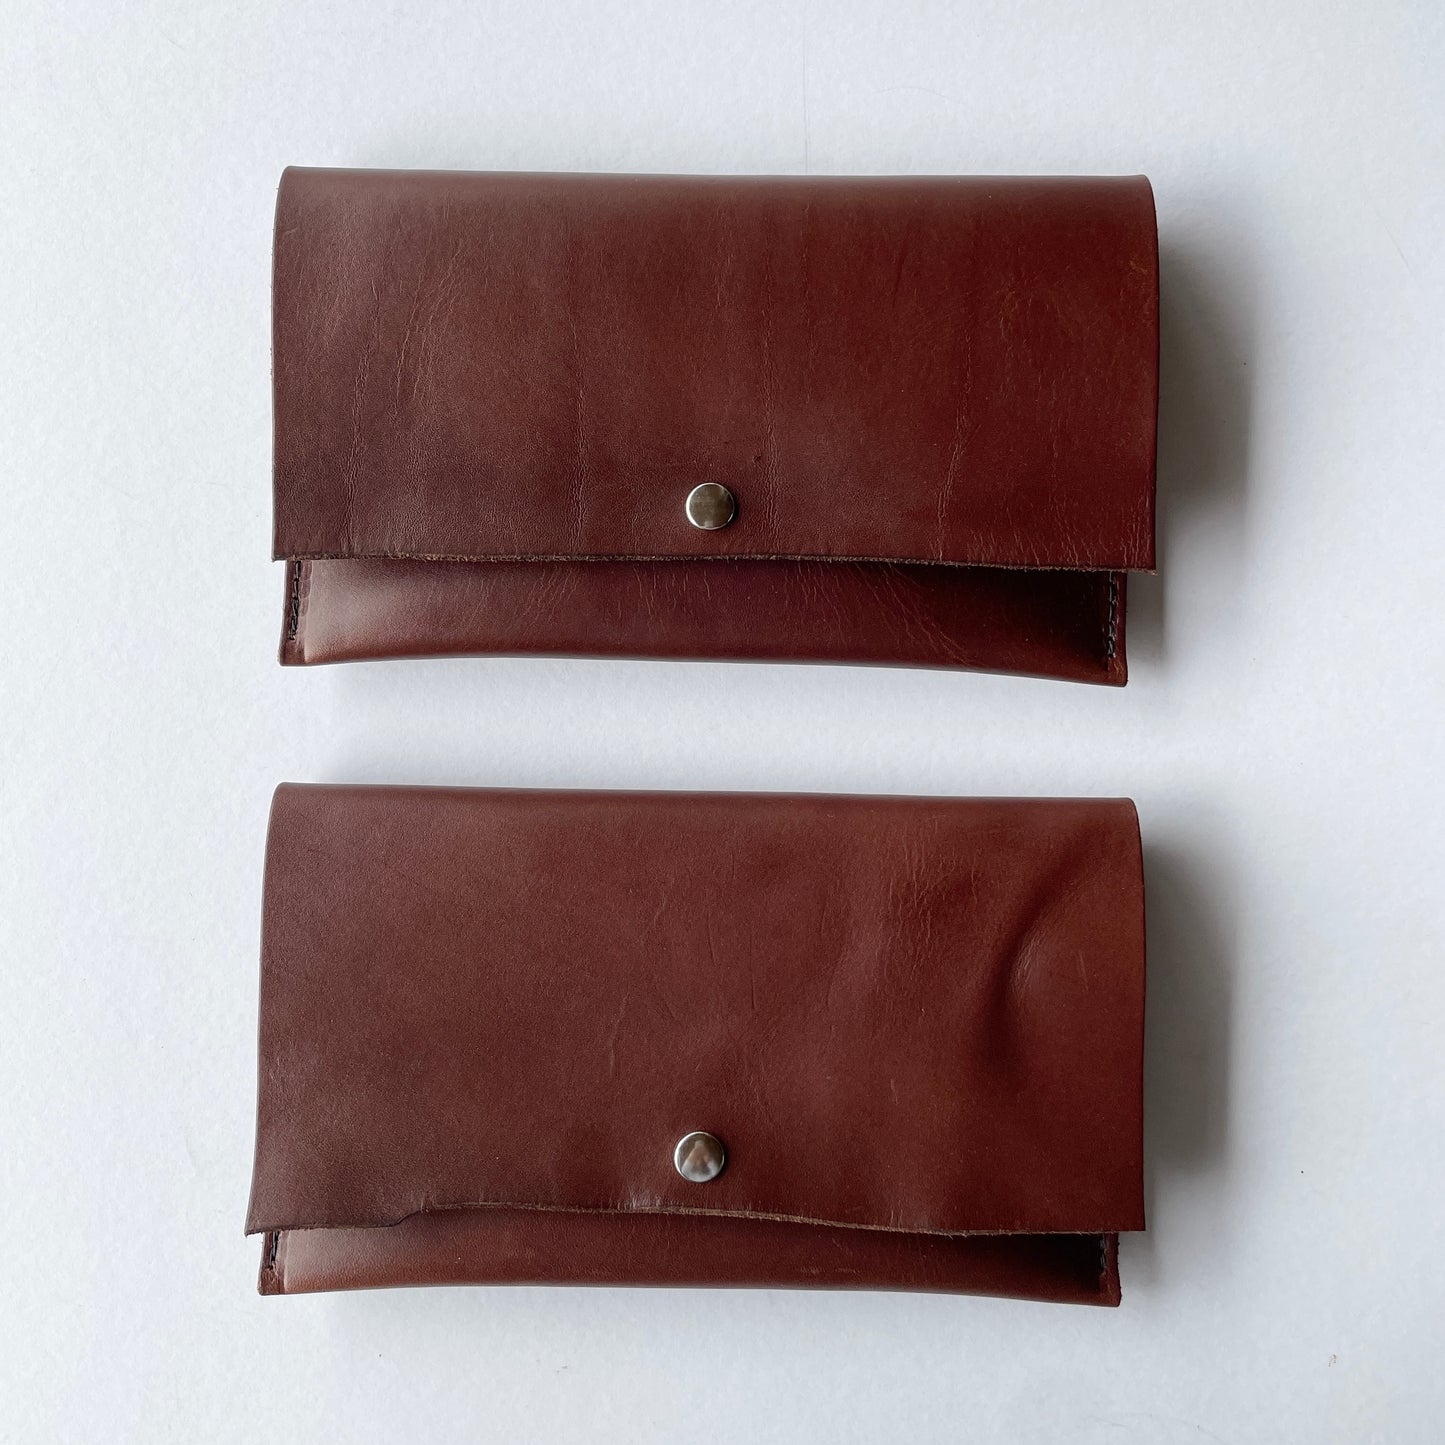 LIMITED EDITION Wallet Clutch - dark chocolate brown leather